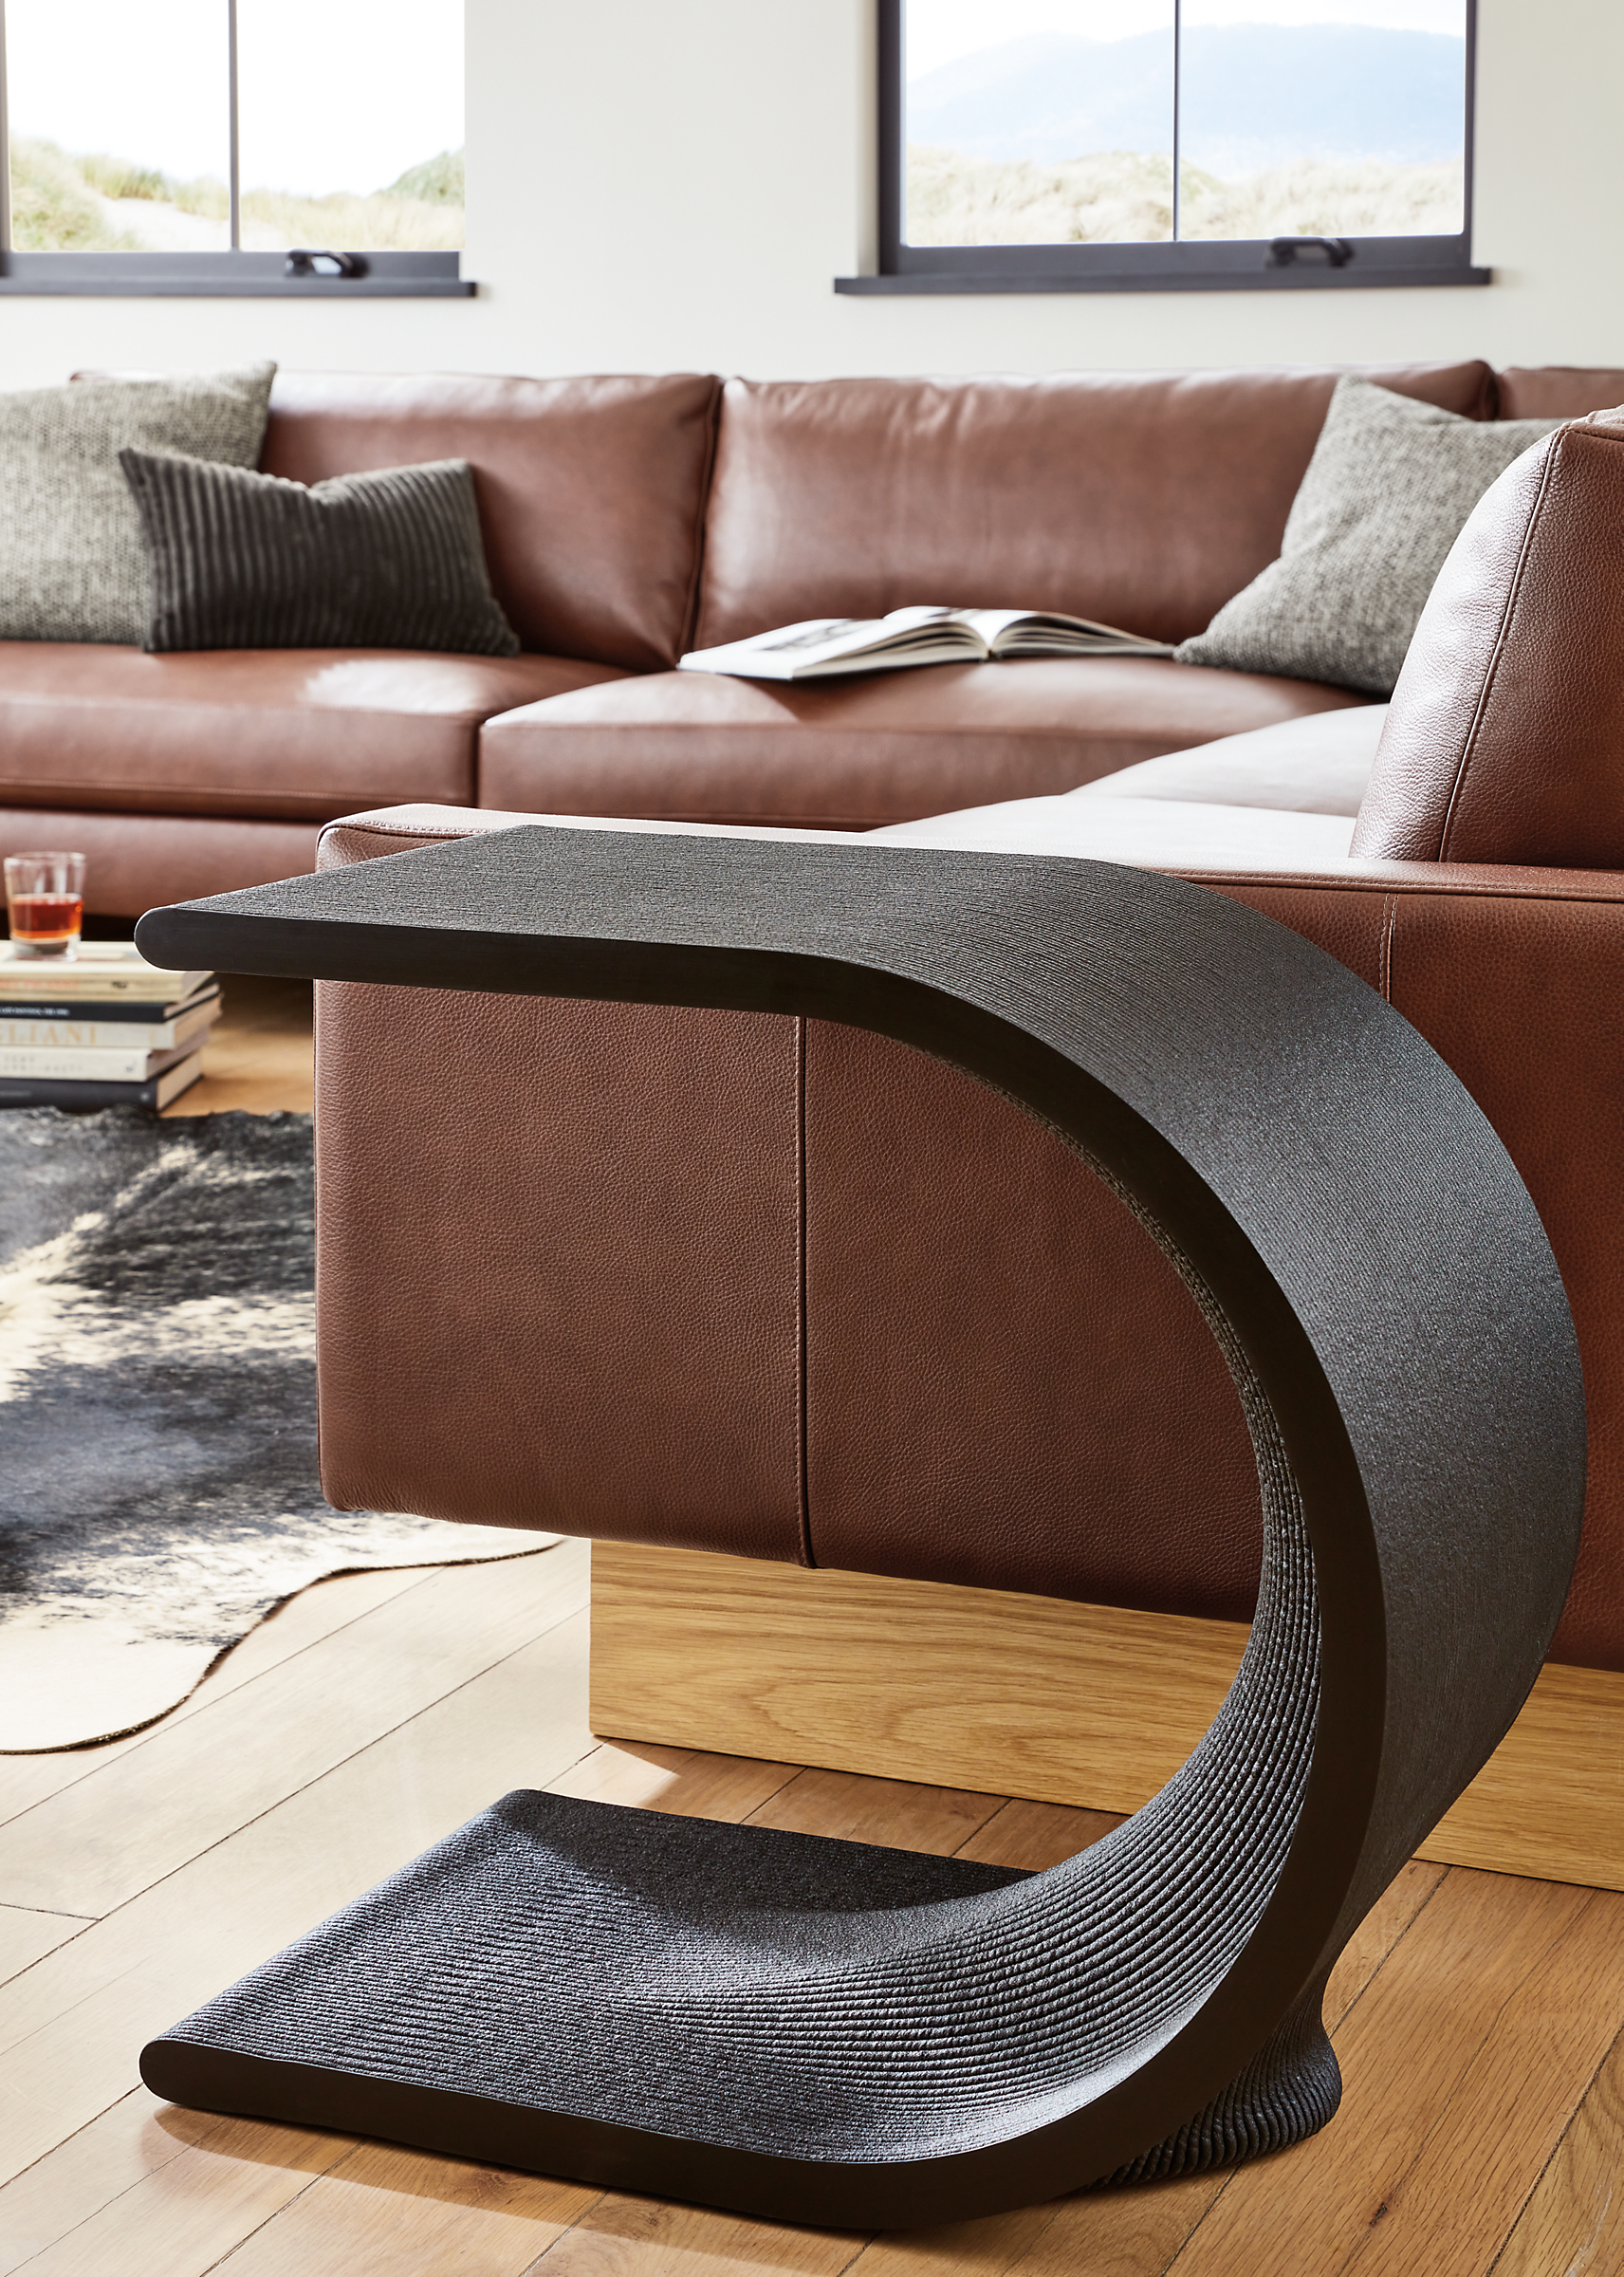 detail of tangent c-table in living room beside pierson sectional